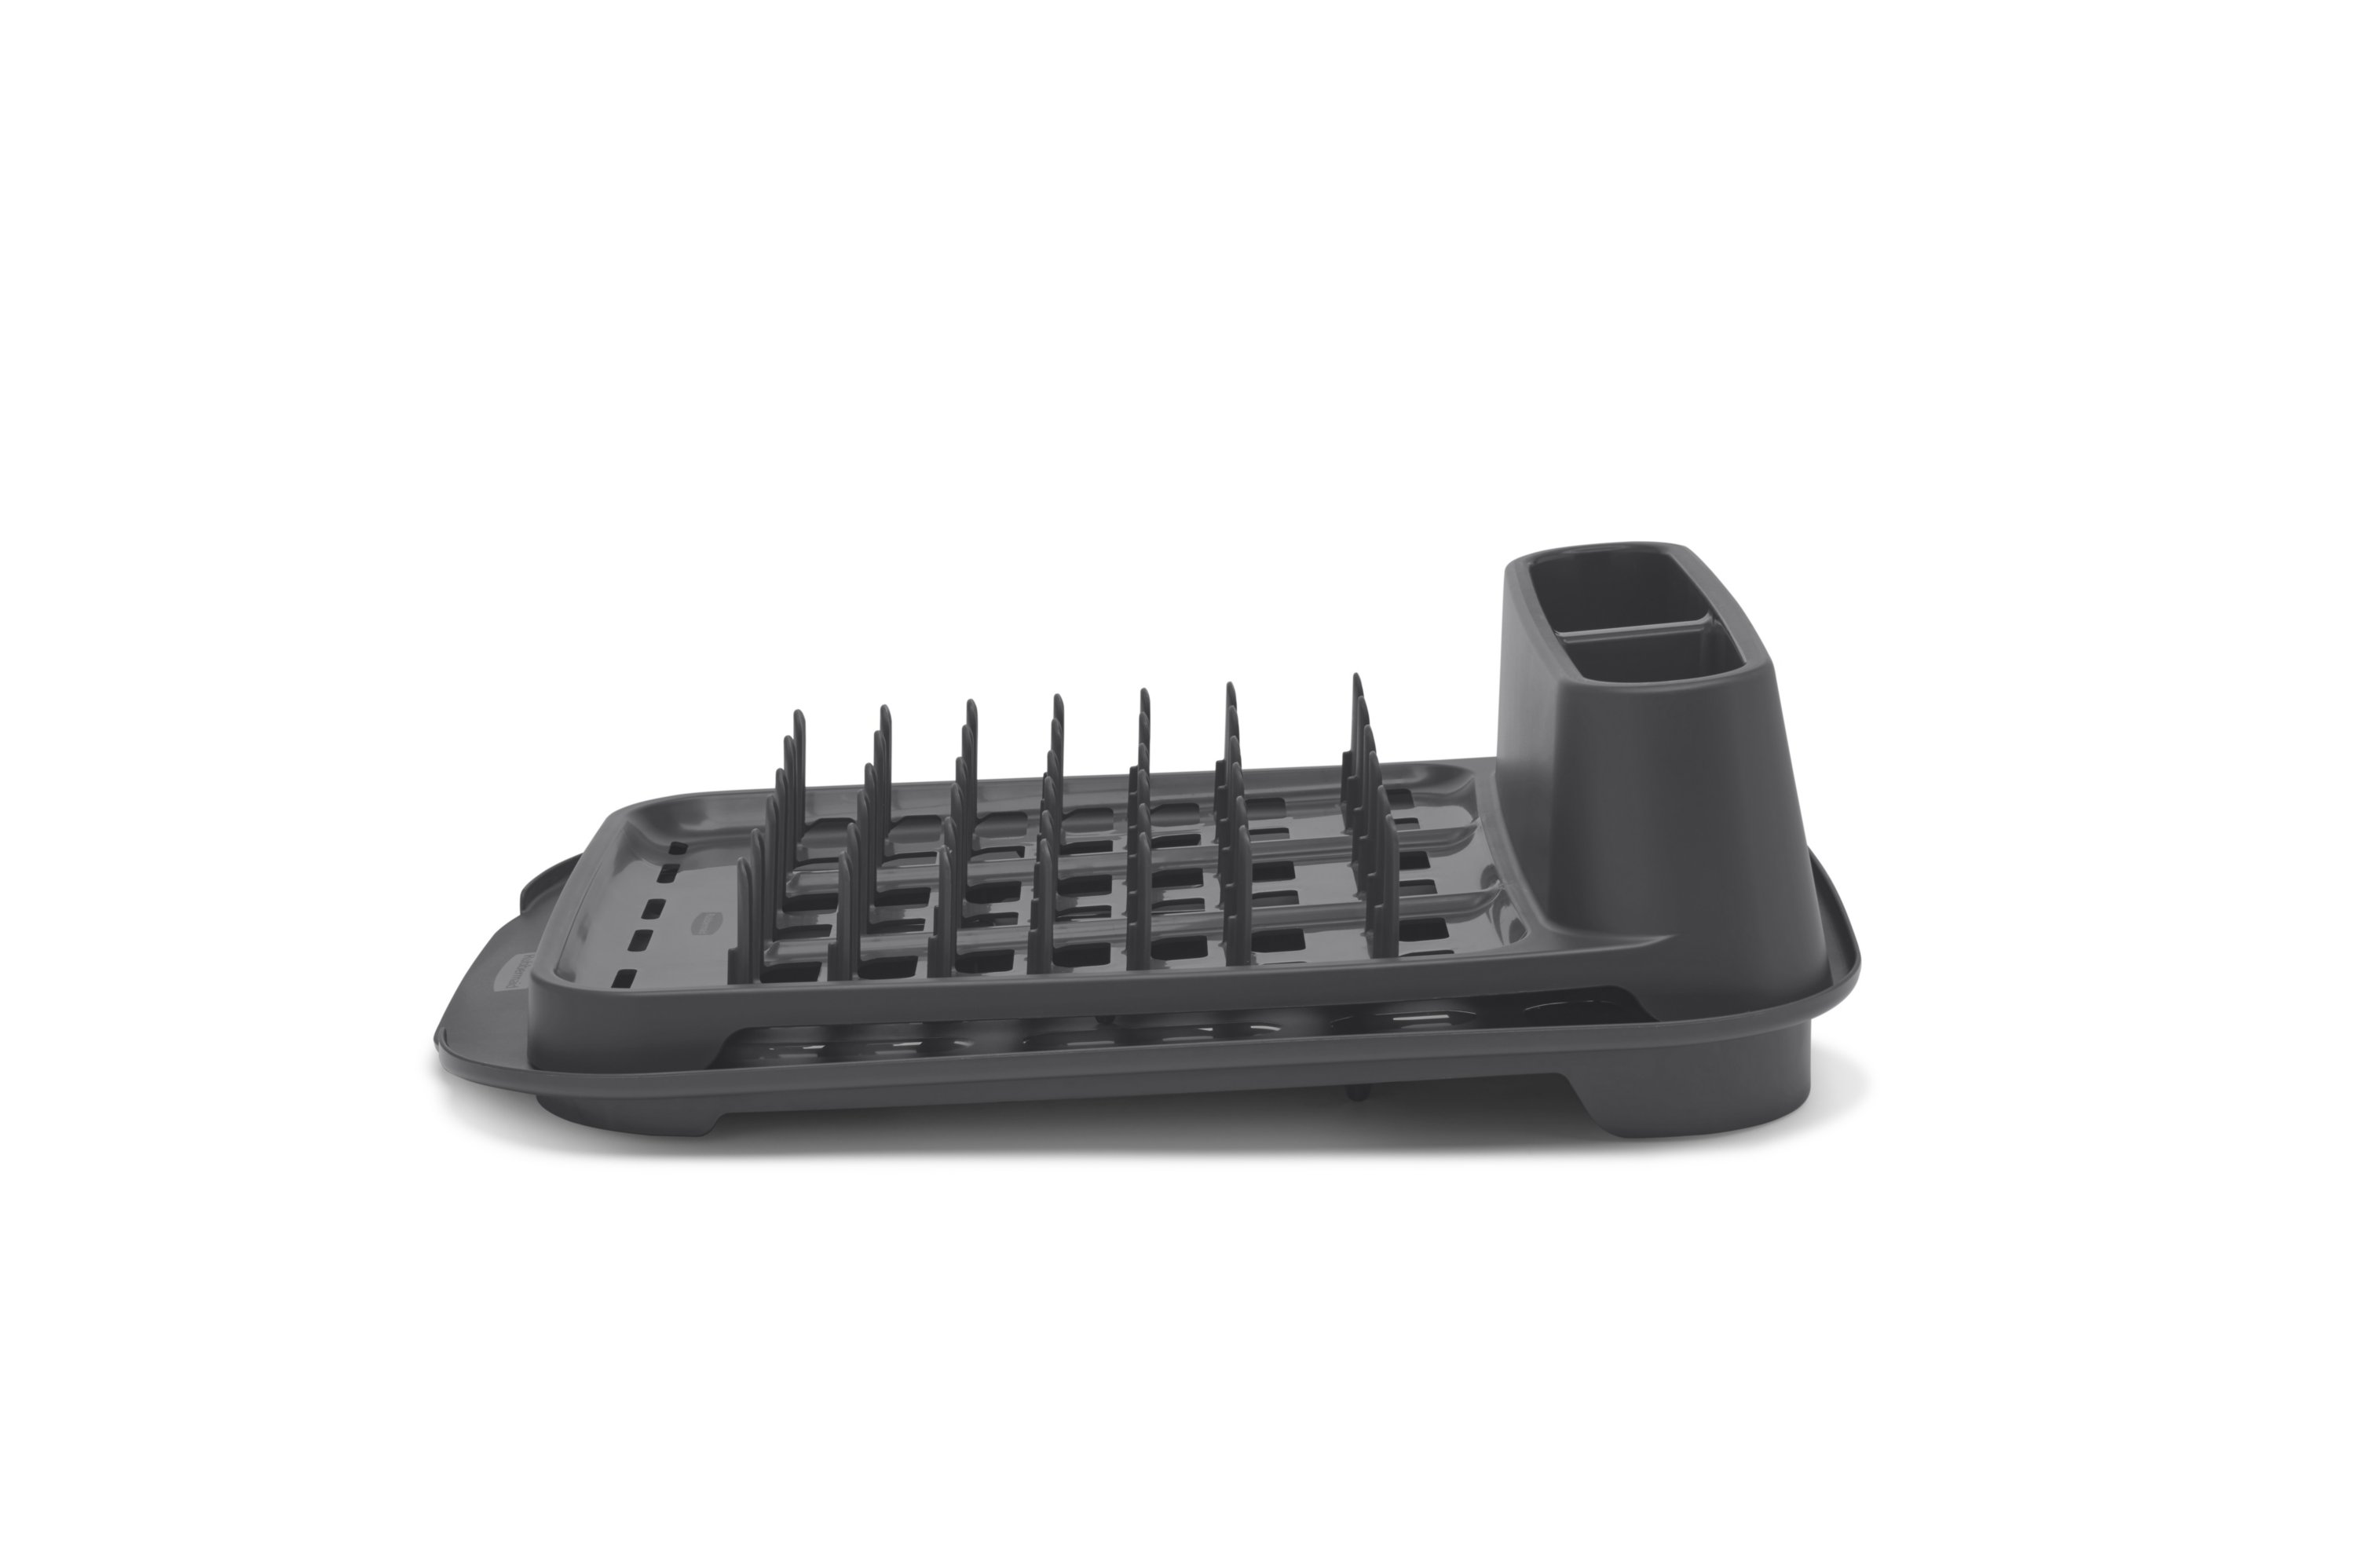 Rubbermaid® Collapsible Dish Drying Rack, Dish Drainer, Raven Grey